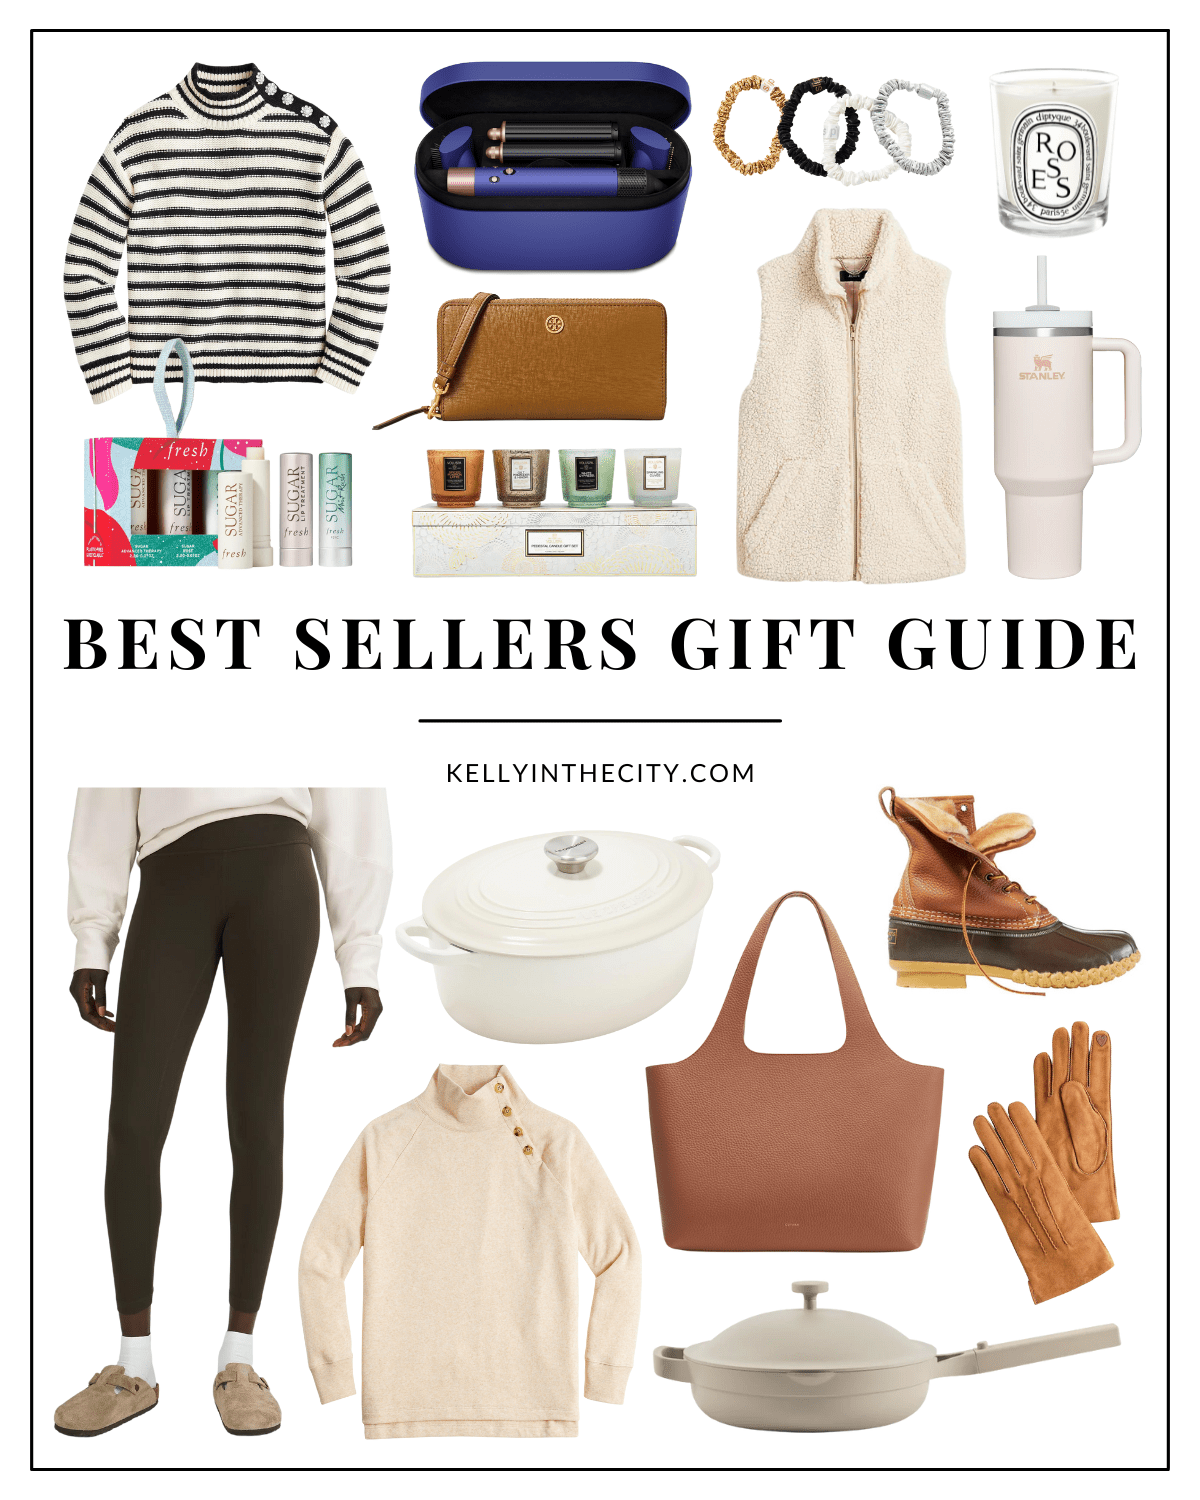 Best Sellers Gift Guide